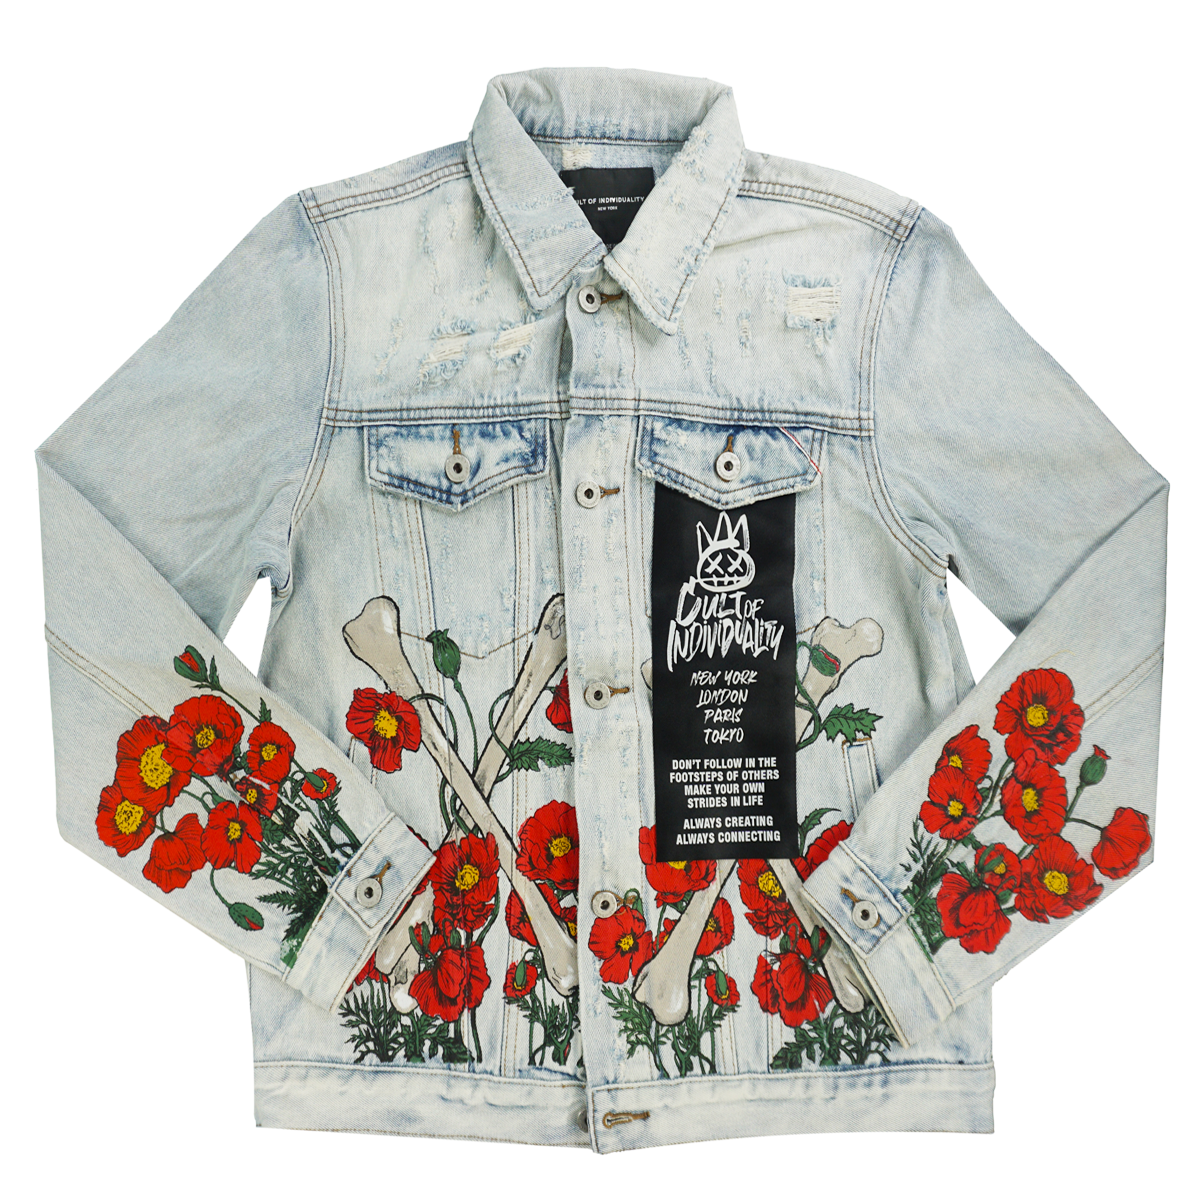 Jeans, Skinny Jeans, Blue Jeans, Cult Of Individuality, Men, Boys, Teens, Gifts, Wmns, Girls,Urban, Style, Fashion, Ripped Jeans, Jean Jacket, Flowers, 